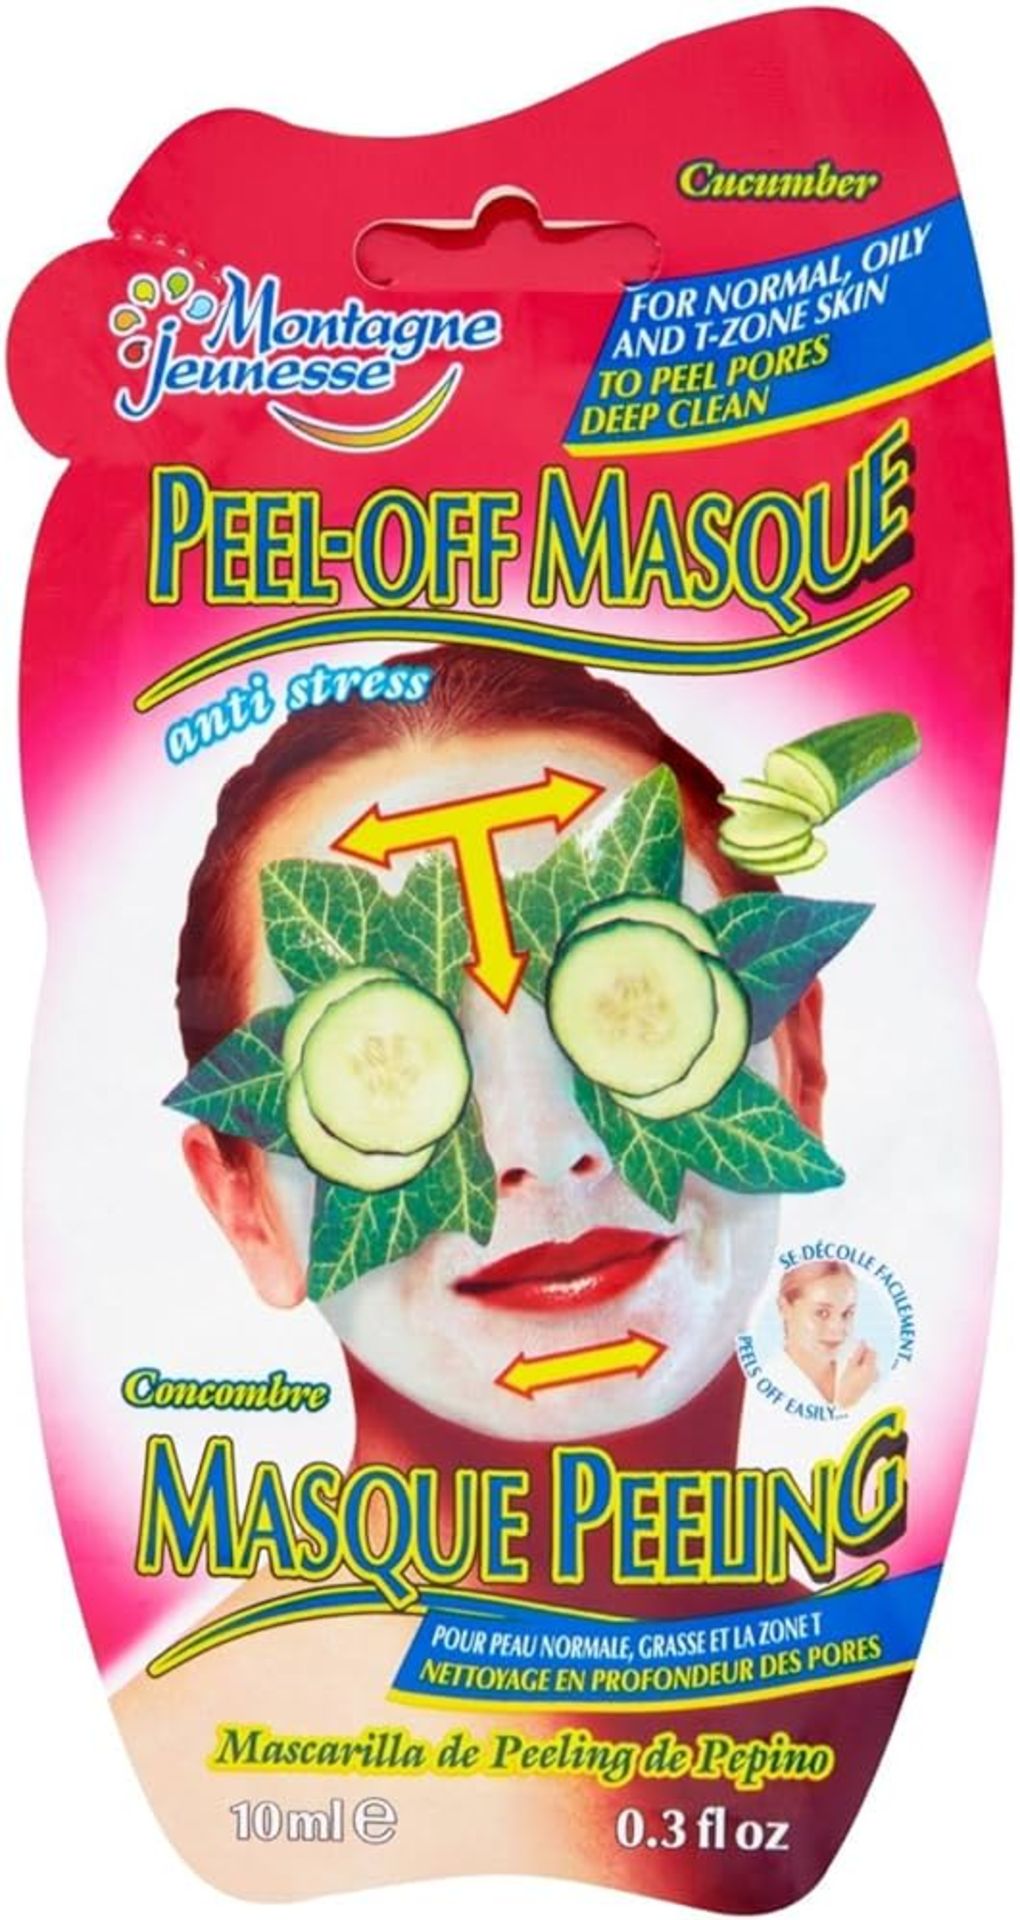 Bulk Trade Lot 10,000 x Montagne Jeunesse Face Masks. RRPs Vary from £2.50 - £6. This lot has a